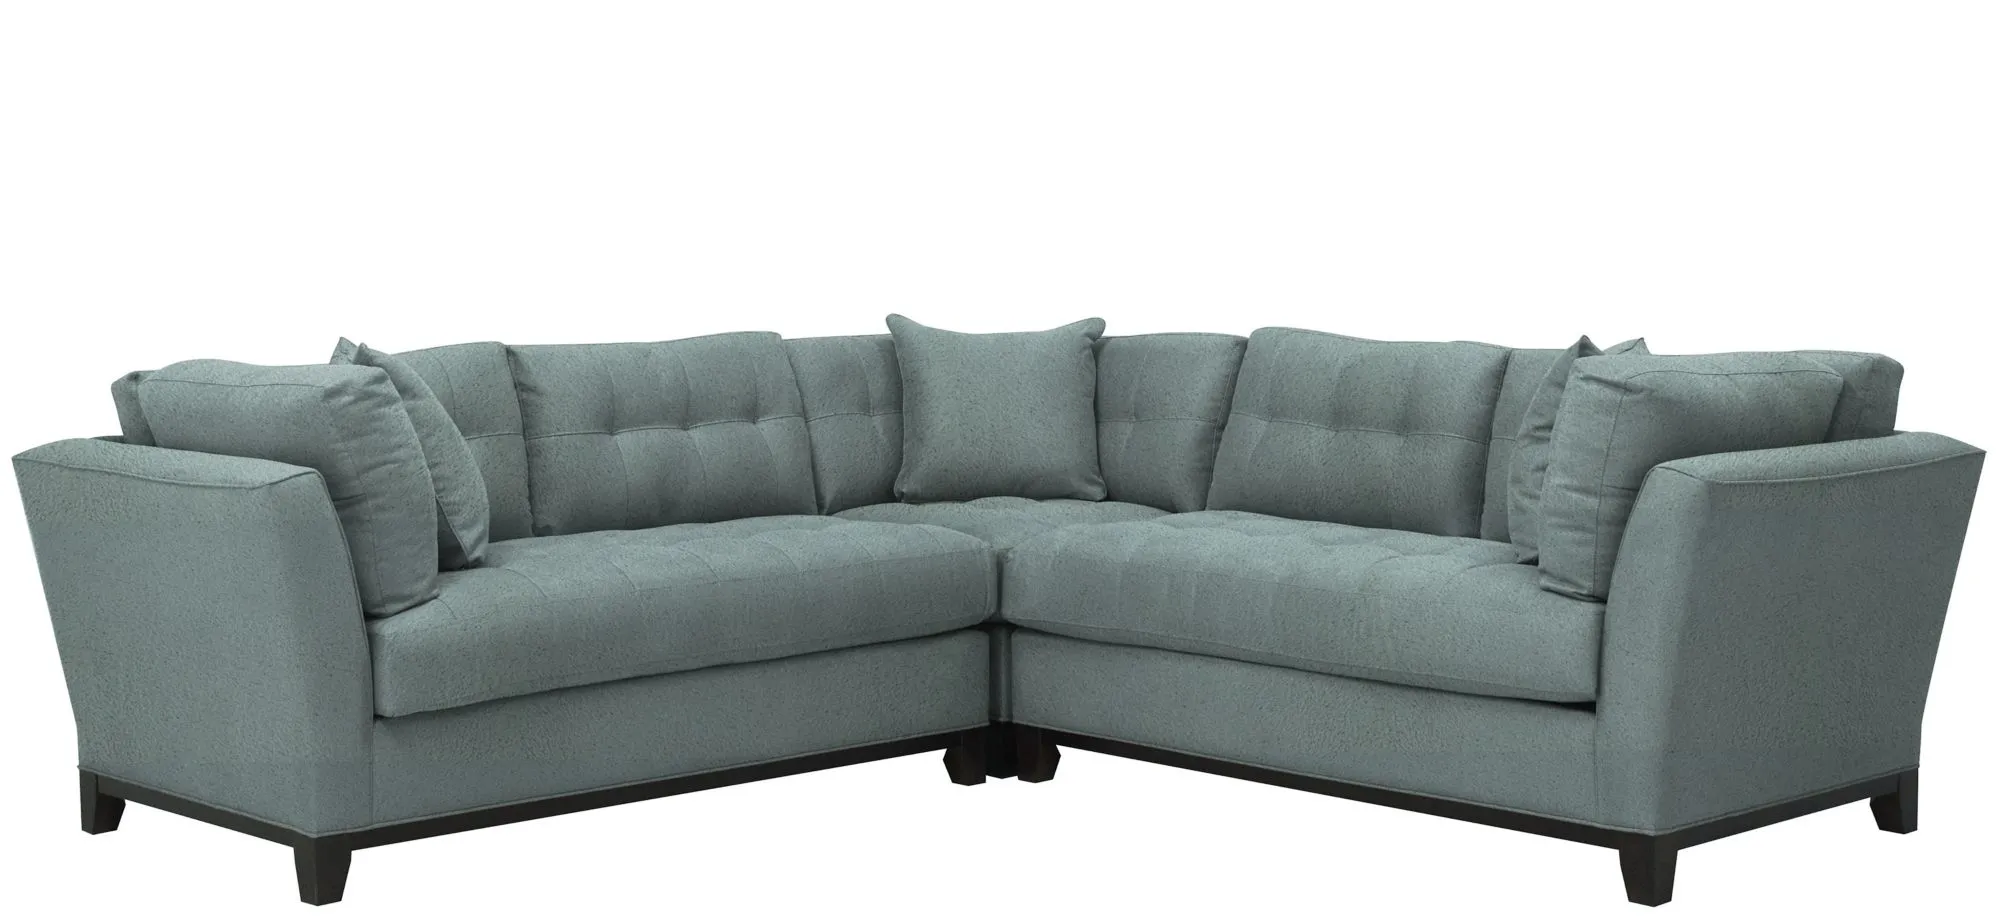 Cityscape 3-pc. Symmetrical Sectional in Suede So Soft Hydra by H.M. Richards